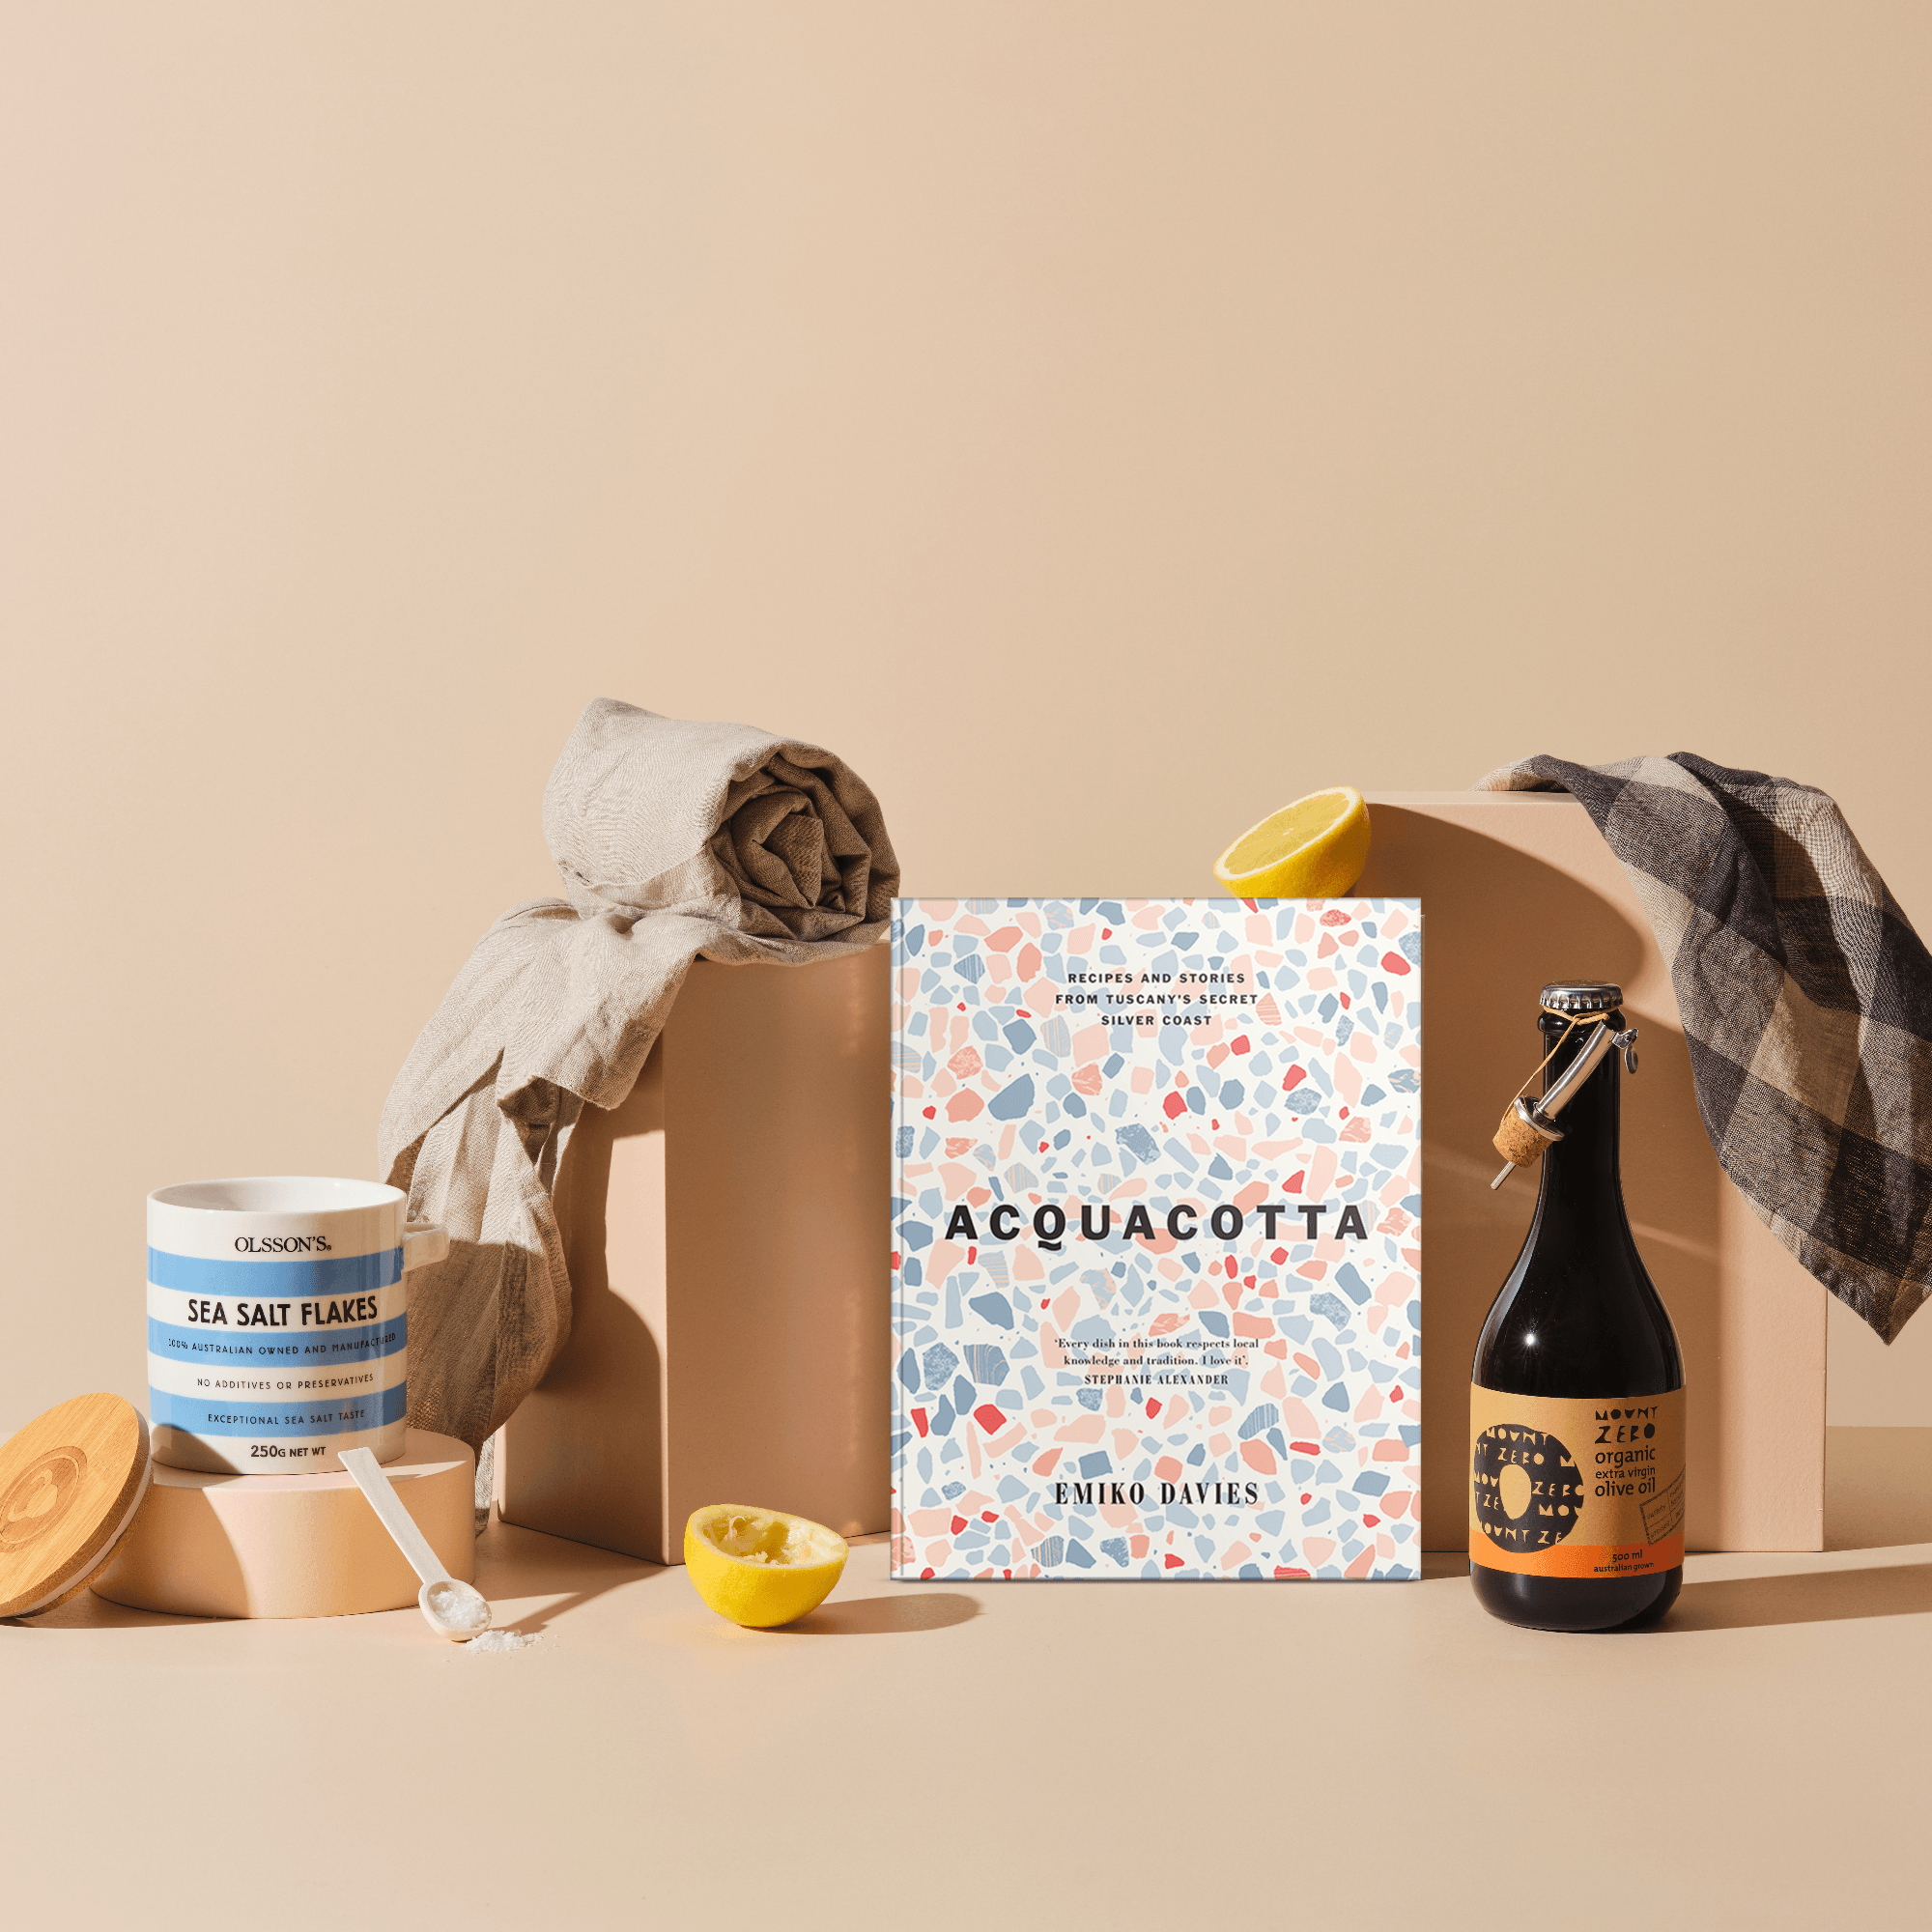 Our gift, Larder Love in the large size, featuring new Acquacotta written by Emiko Davies